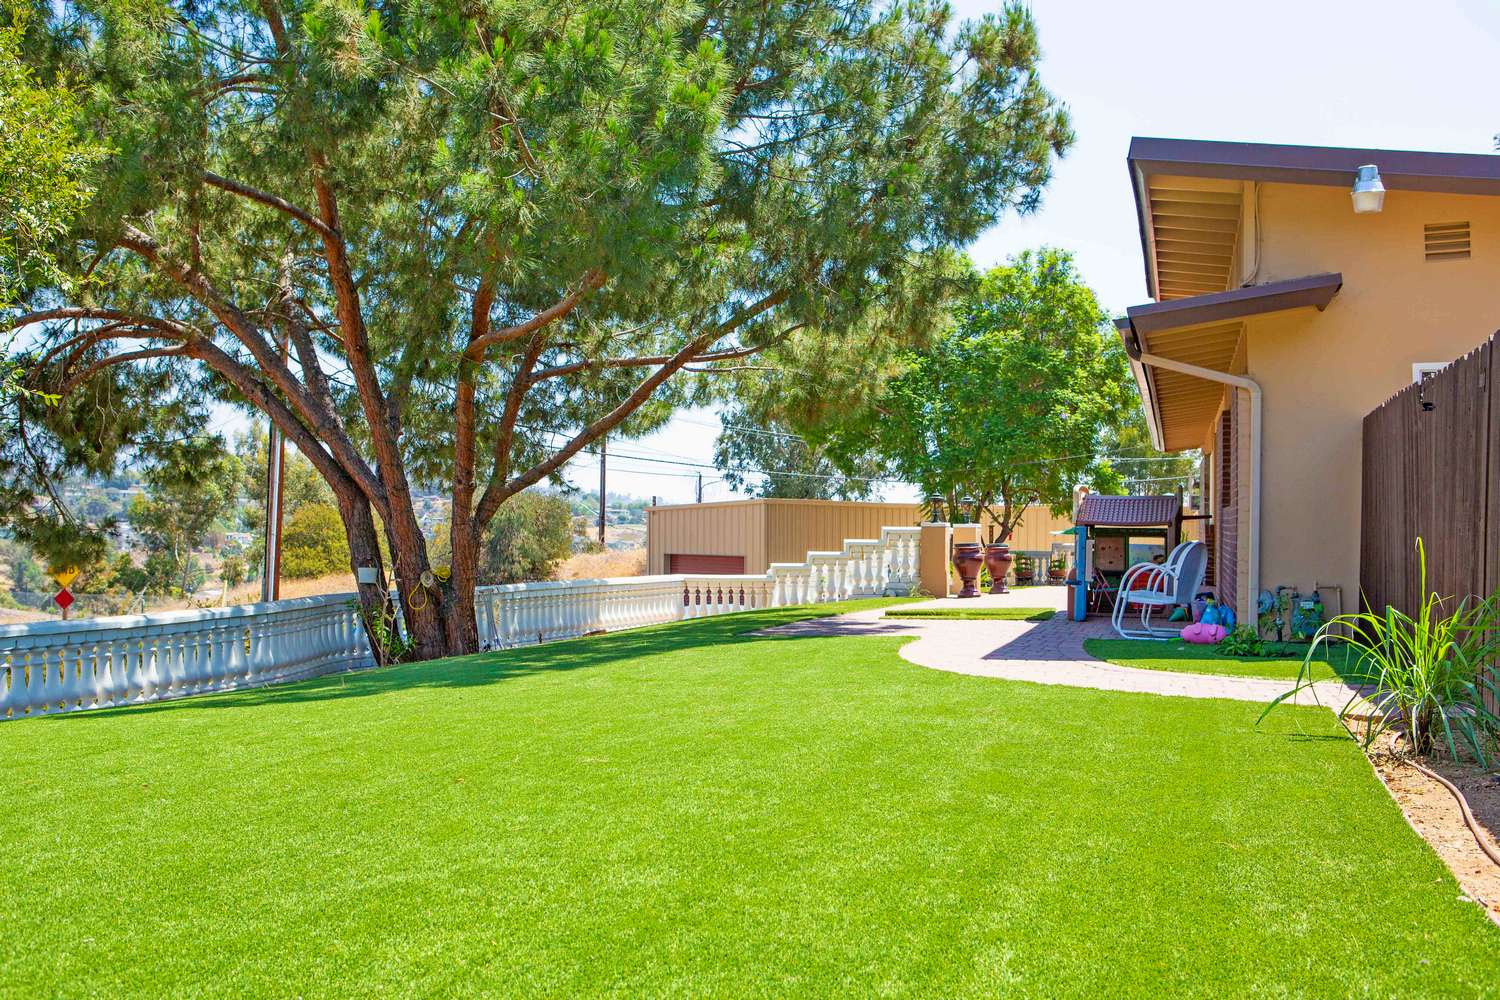 Artificial Turf And Paver Systems in La Mesa